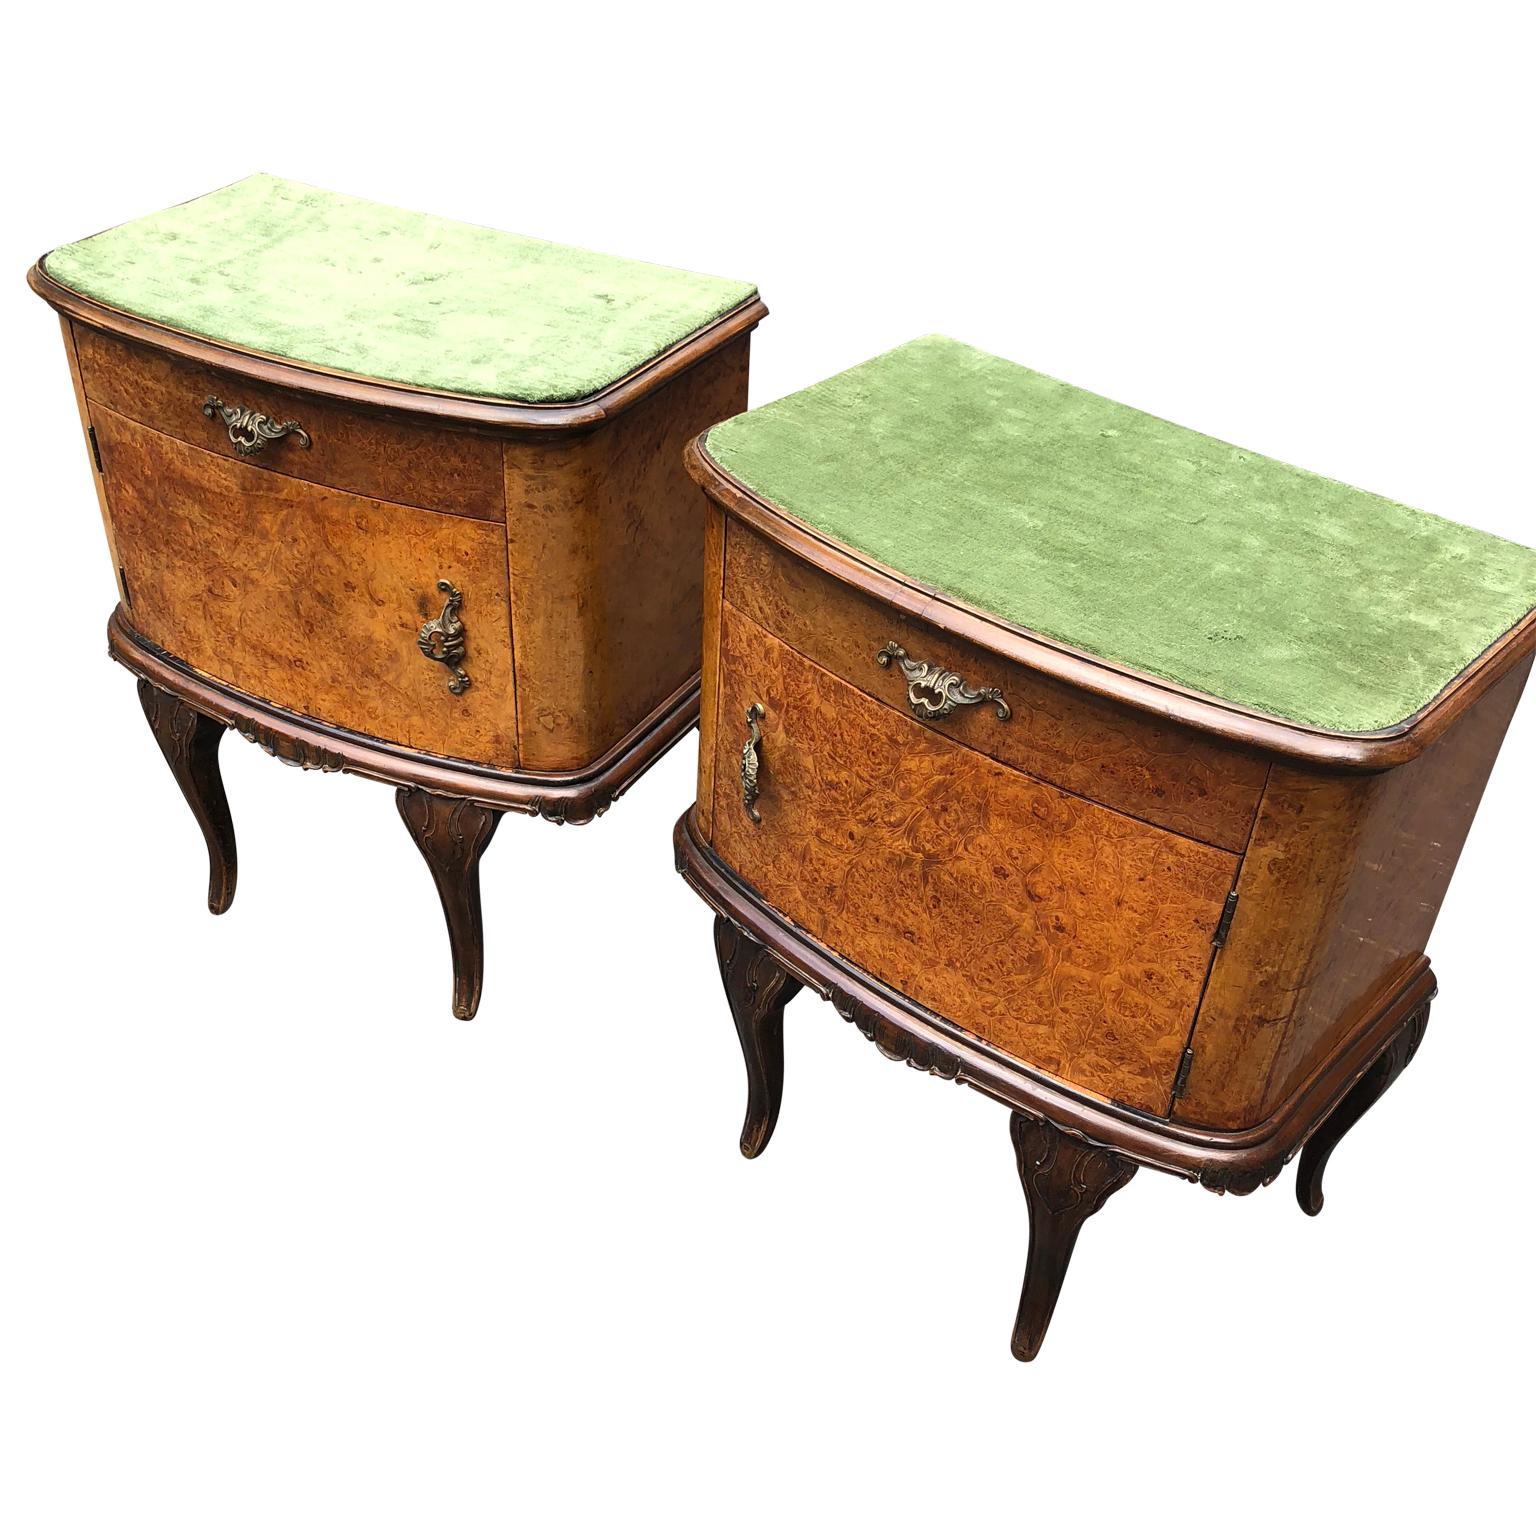 20th Century Pair of Italian Rococo Style Bed Side Tables